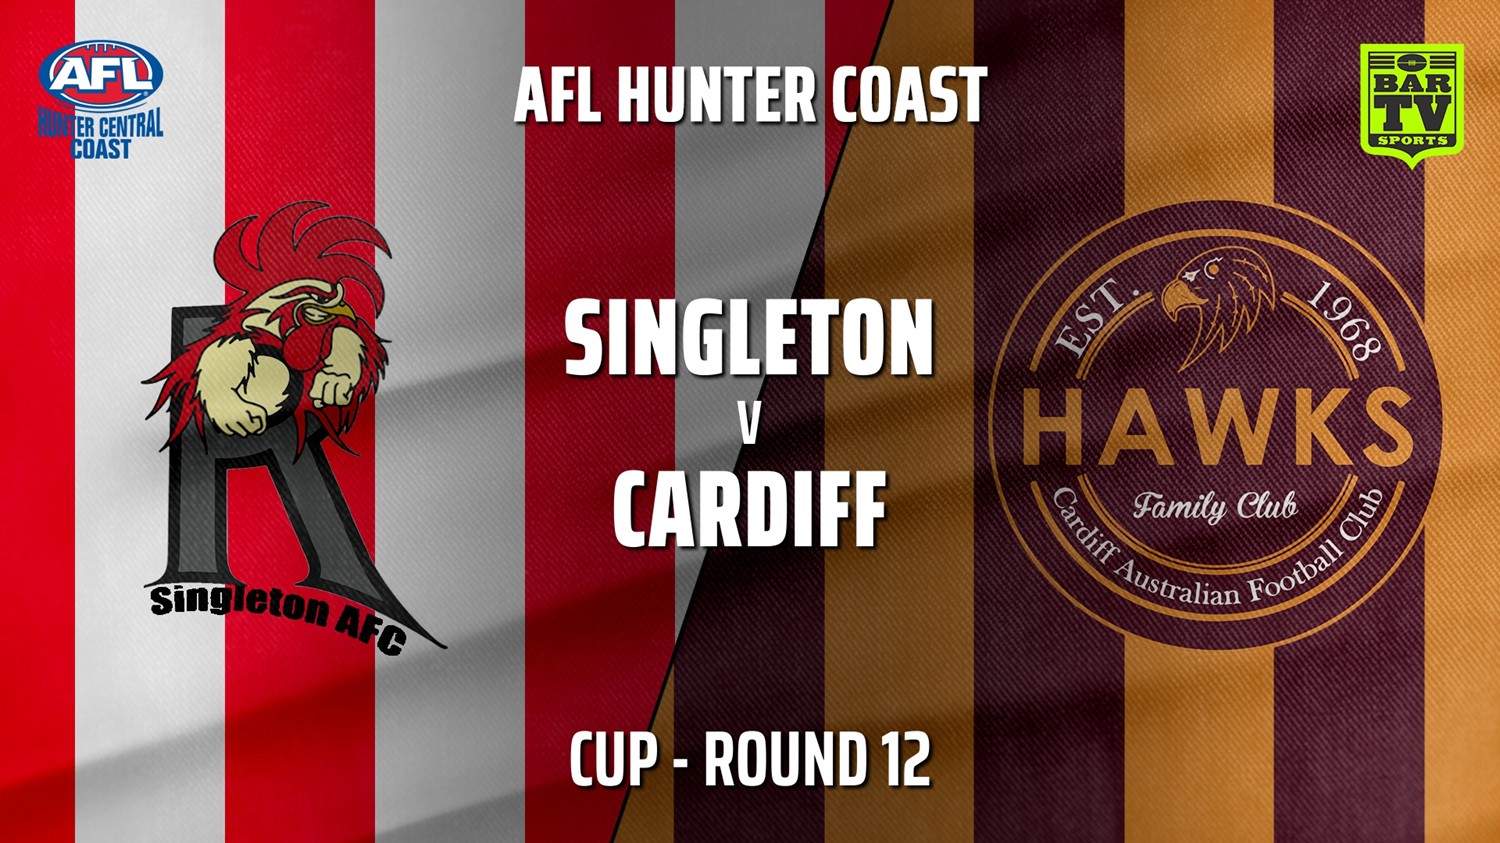 210710-AFL Hunter Central Coast Round 12 - Cup - Singleton Roosters v Cardiff Hawks Minigame Slate Image